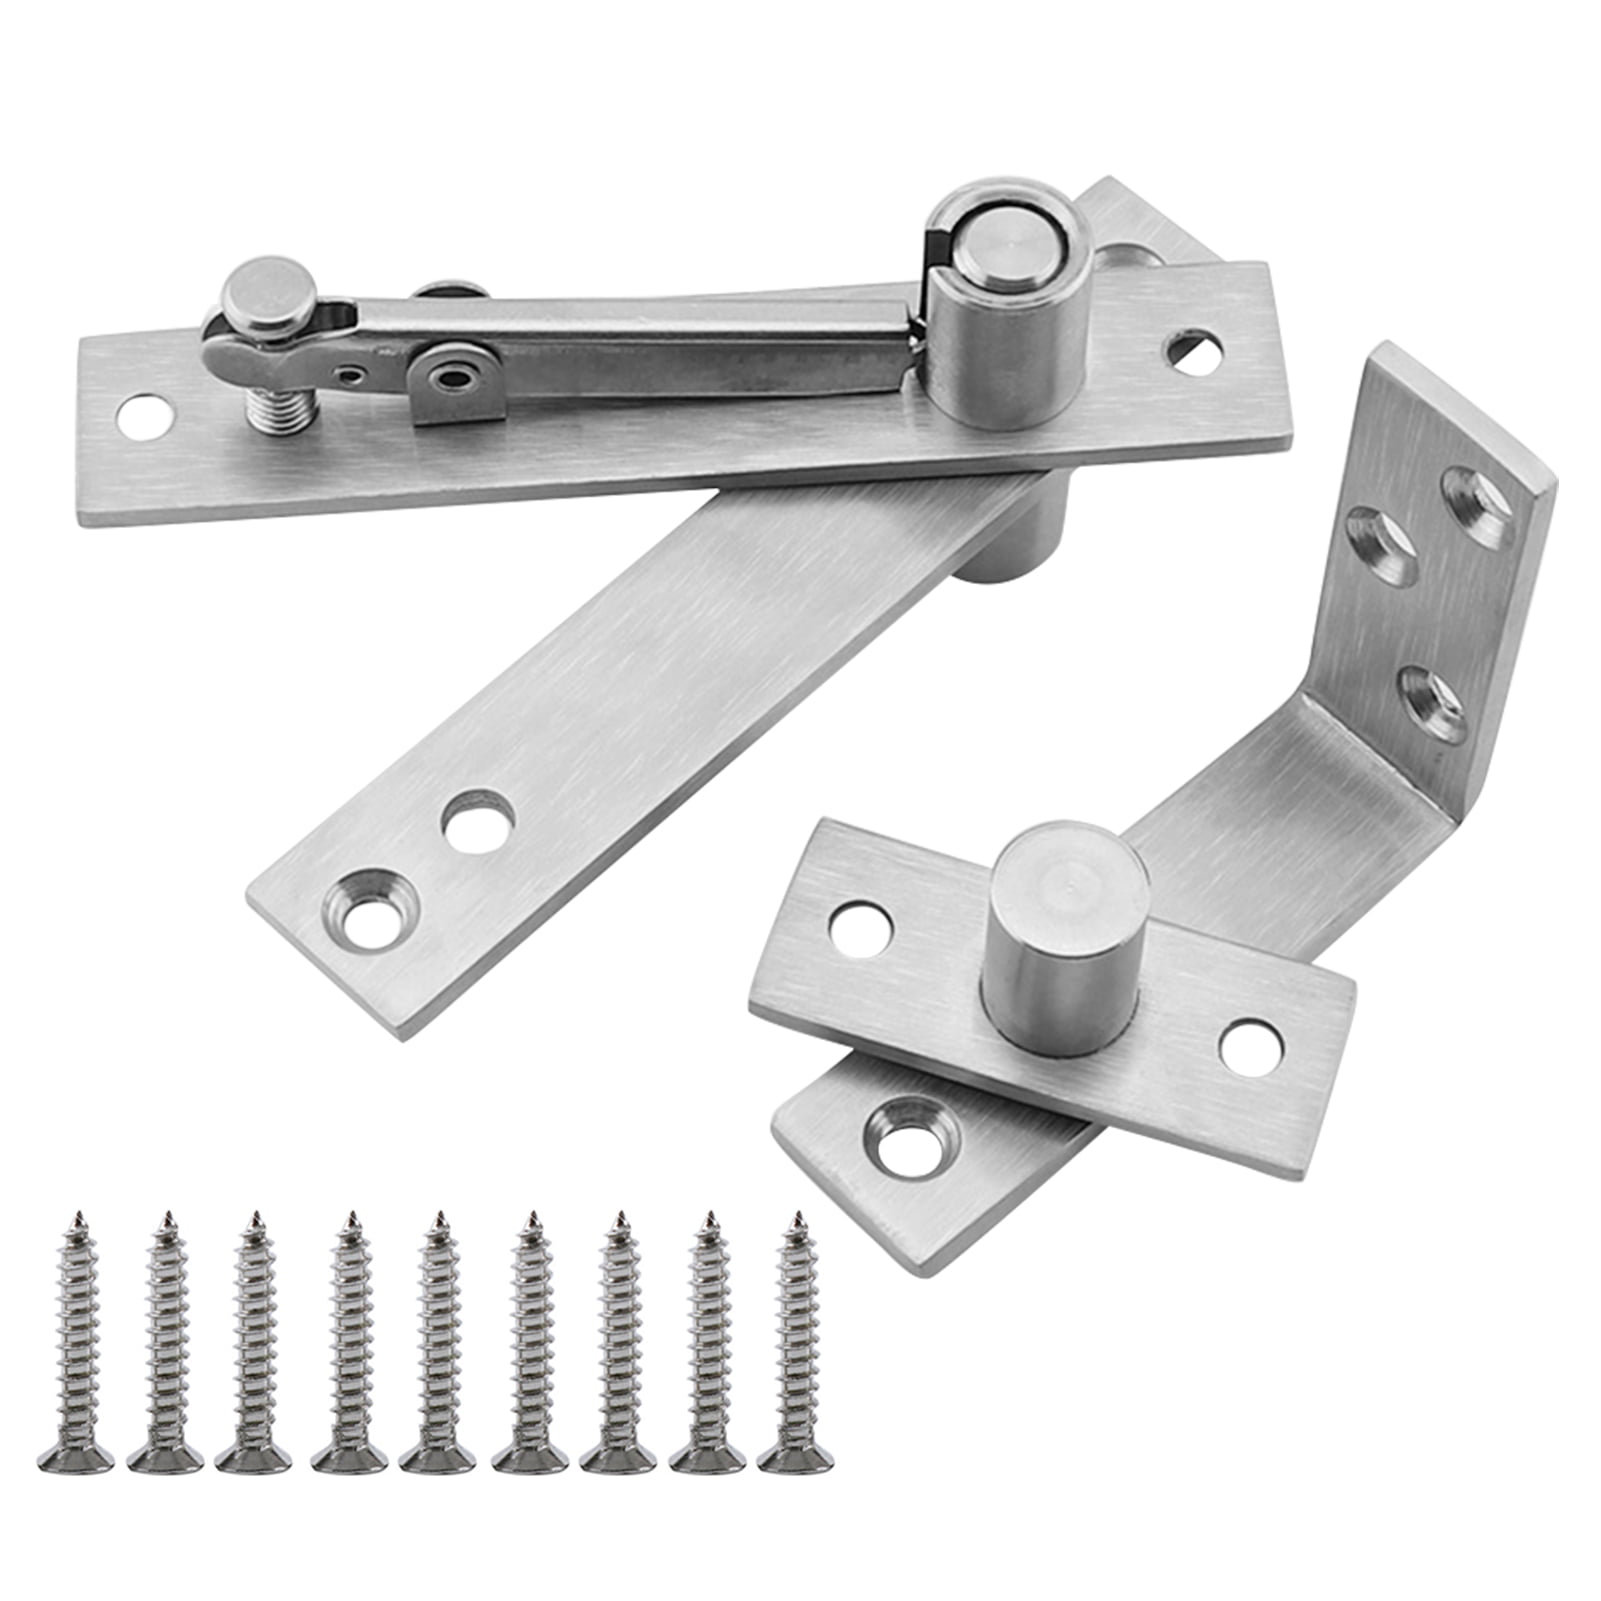 Butt Hinge Stainless Steel Rotation Furniture Hinge for Cabinet Drawer Door 10 Pieces